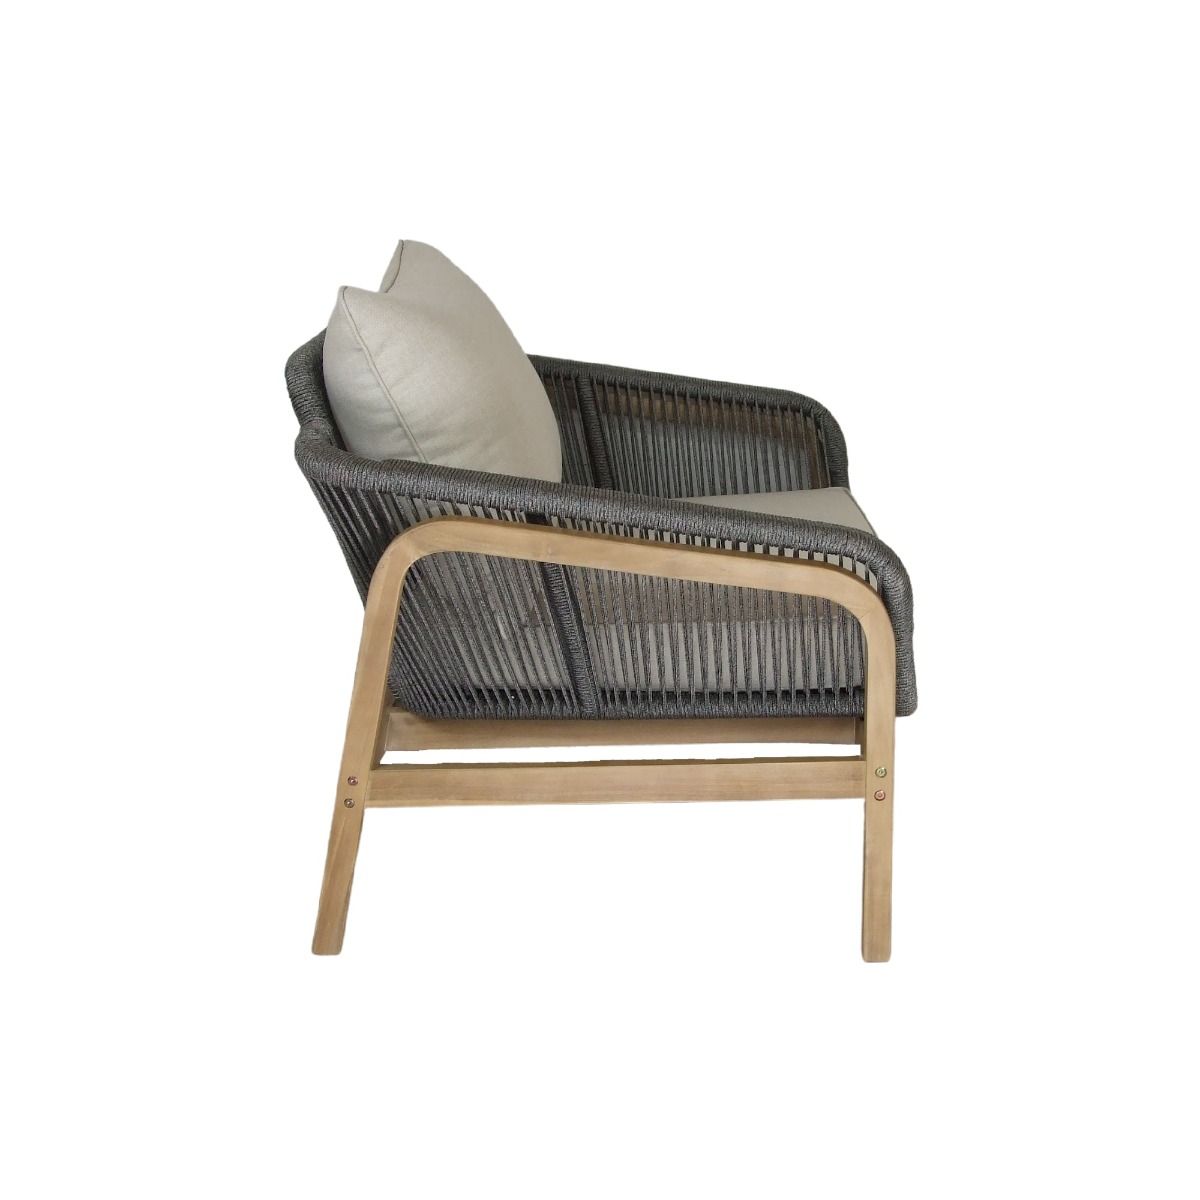 CR Cameo Solid Timber Outdoor Armchair